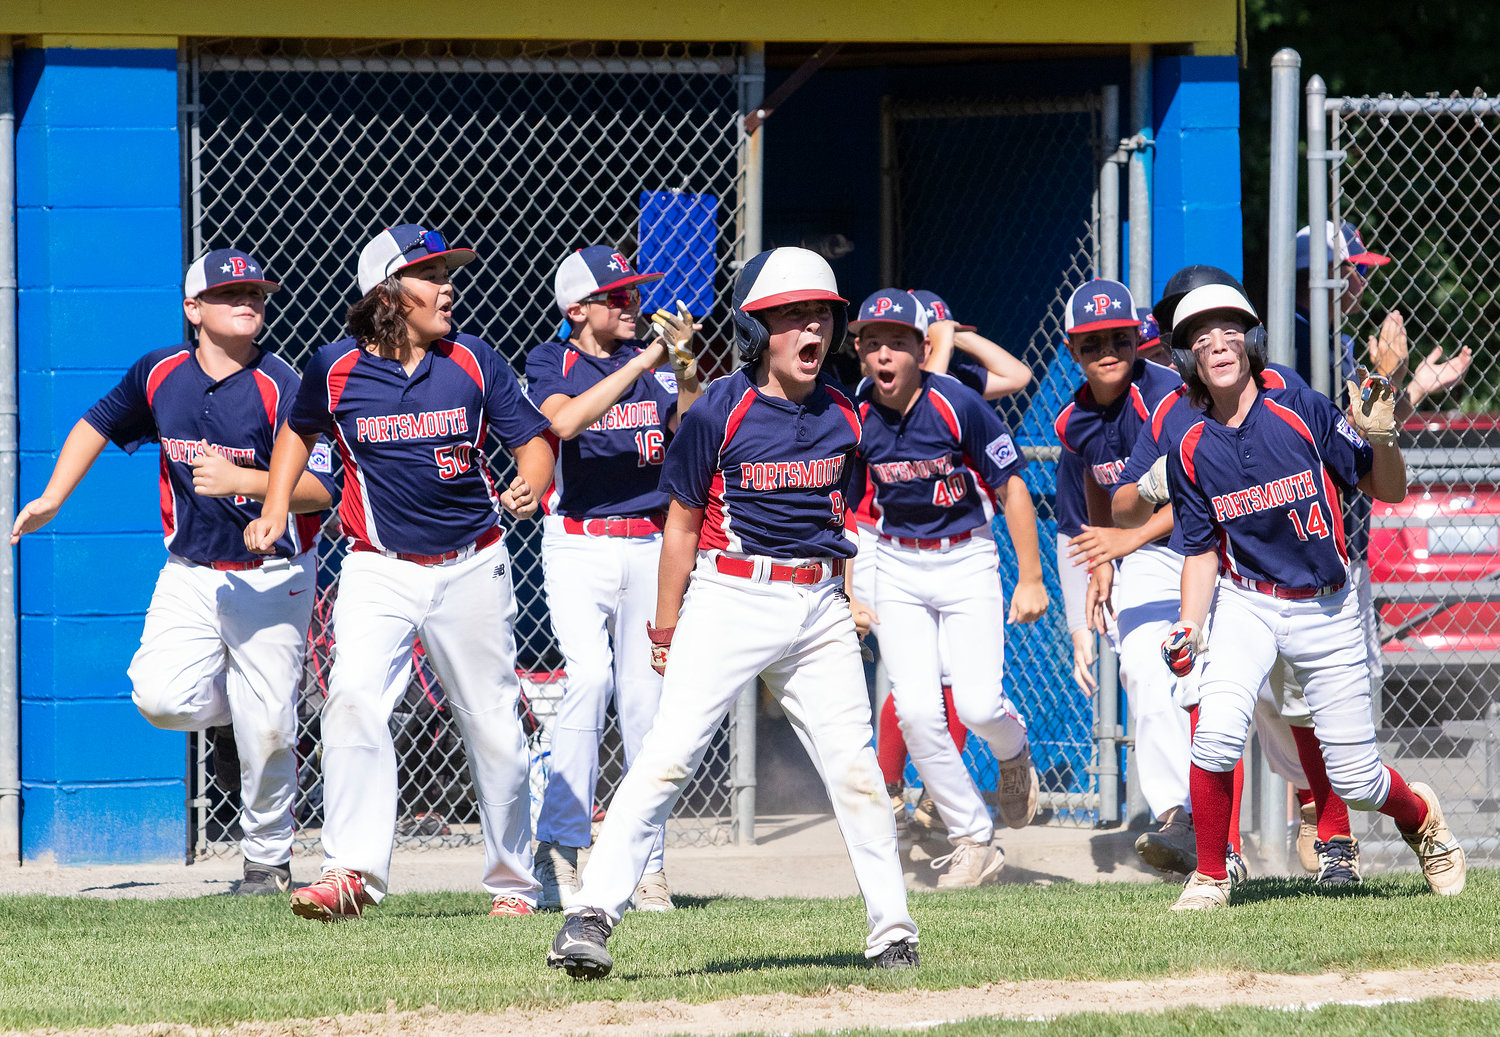 Members of the Portsmouth Little League Major All-Stars team wait to greet Tyler Boiani at home plate after the three-hitter smashed a homer over the centerfield fence to give his team a 2-0 lead against Cumberland in the state tournament on Saturday.